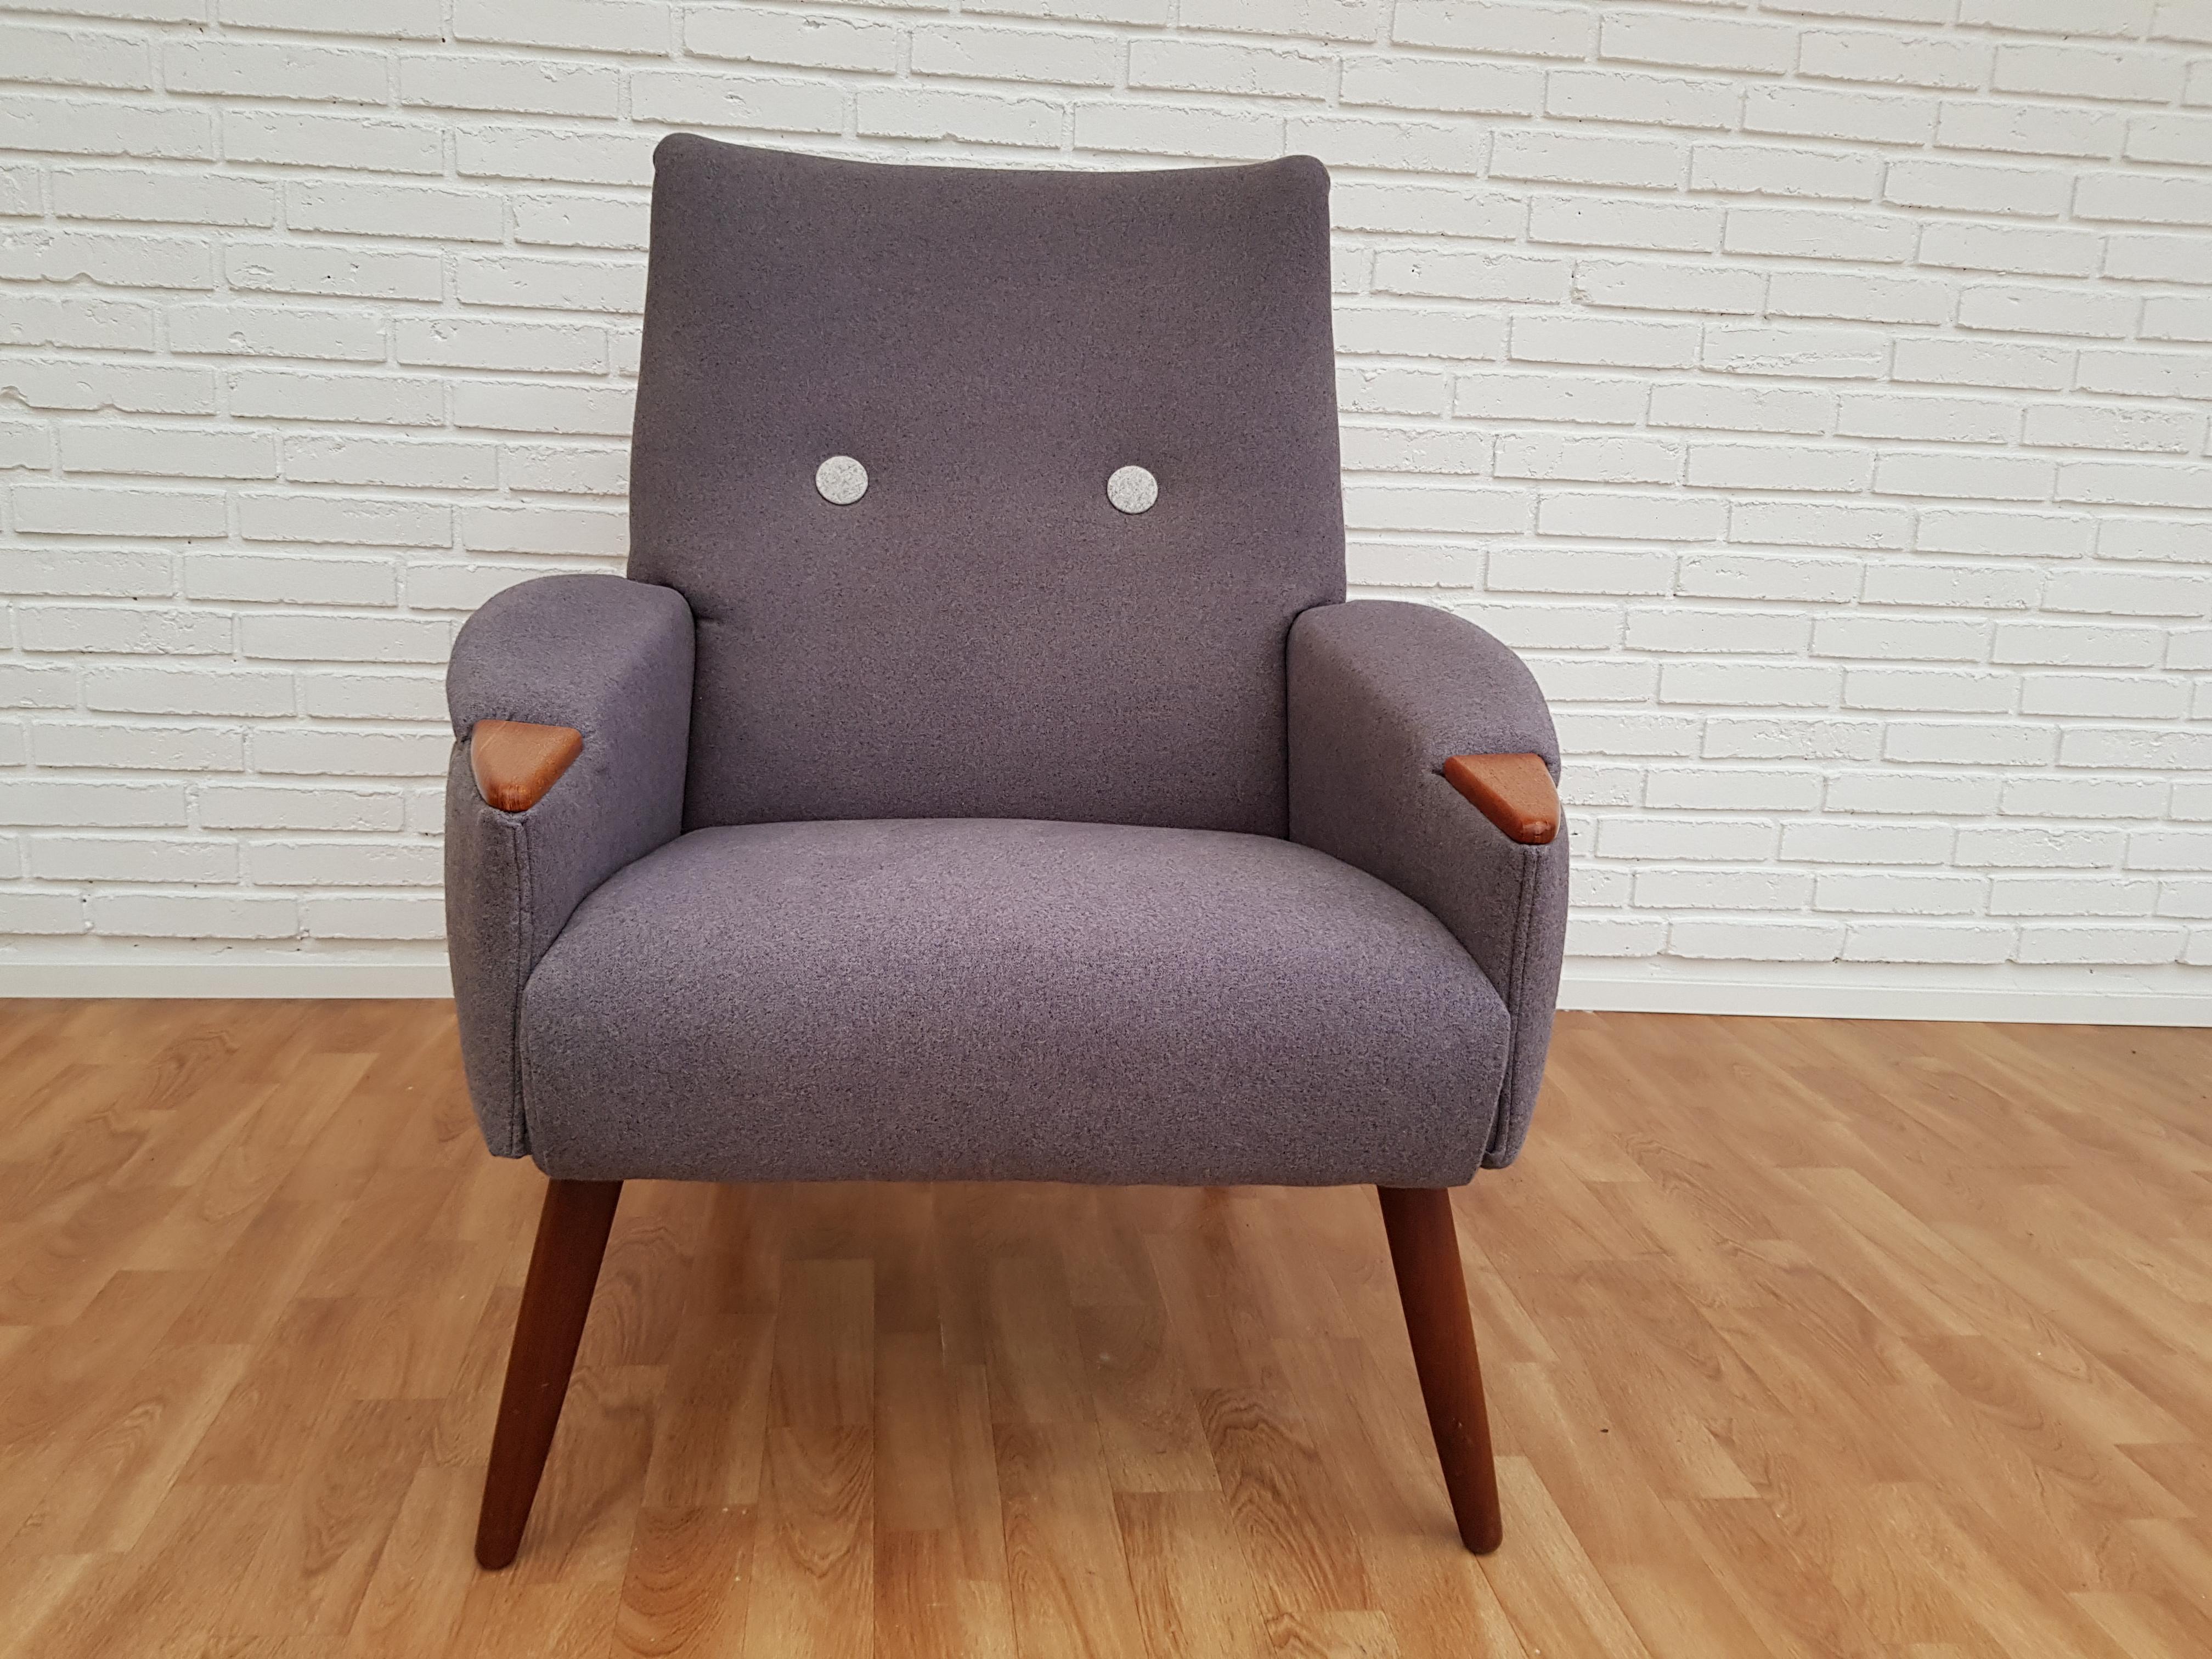 Retro lounge chair with nails and teakwood legs. New reupholstered in quality dark gray and light gray furniture fabric. Completely restored by professional furniture craftsmen at Retro Møbler Galleri. Brand new upholstery. 1960s. Danish furniture